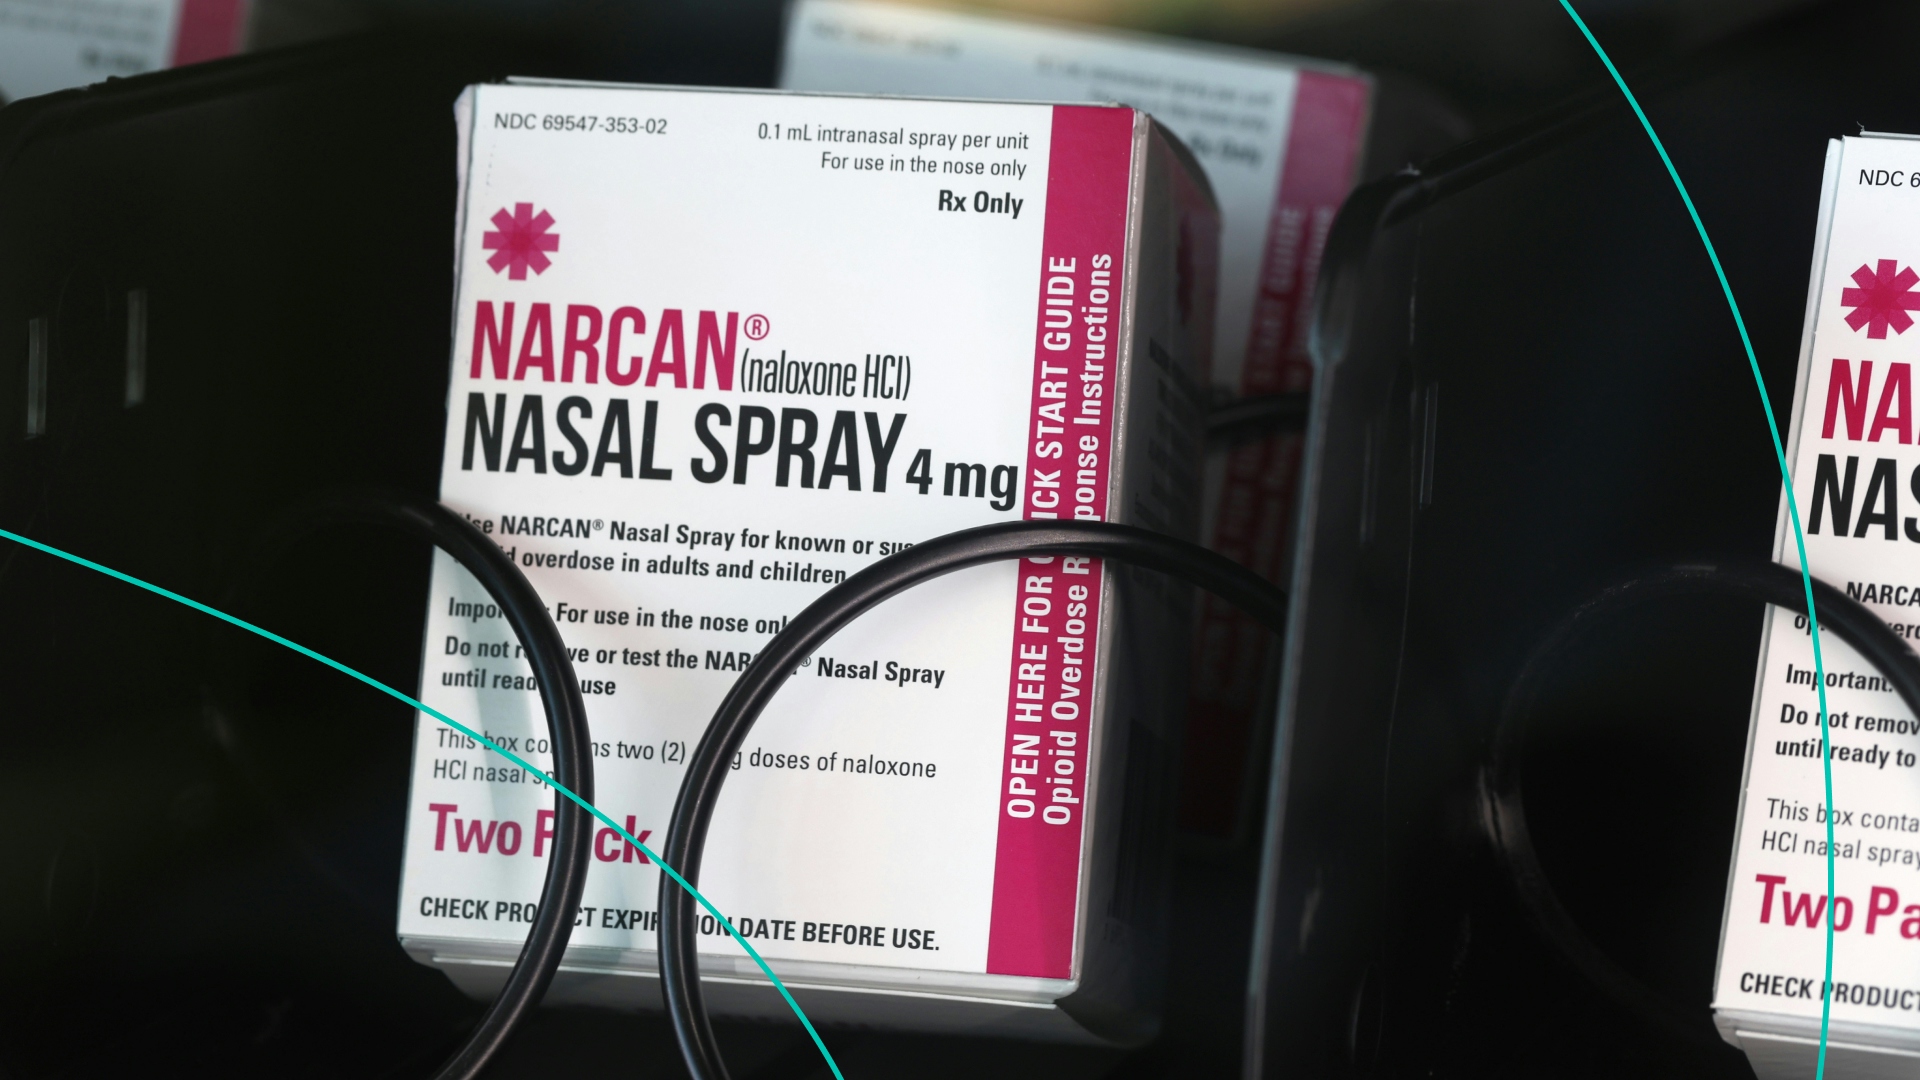 Narcan nasal spray for the treatment of opioid overdoses is made available